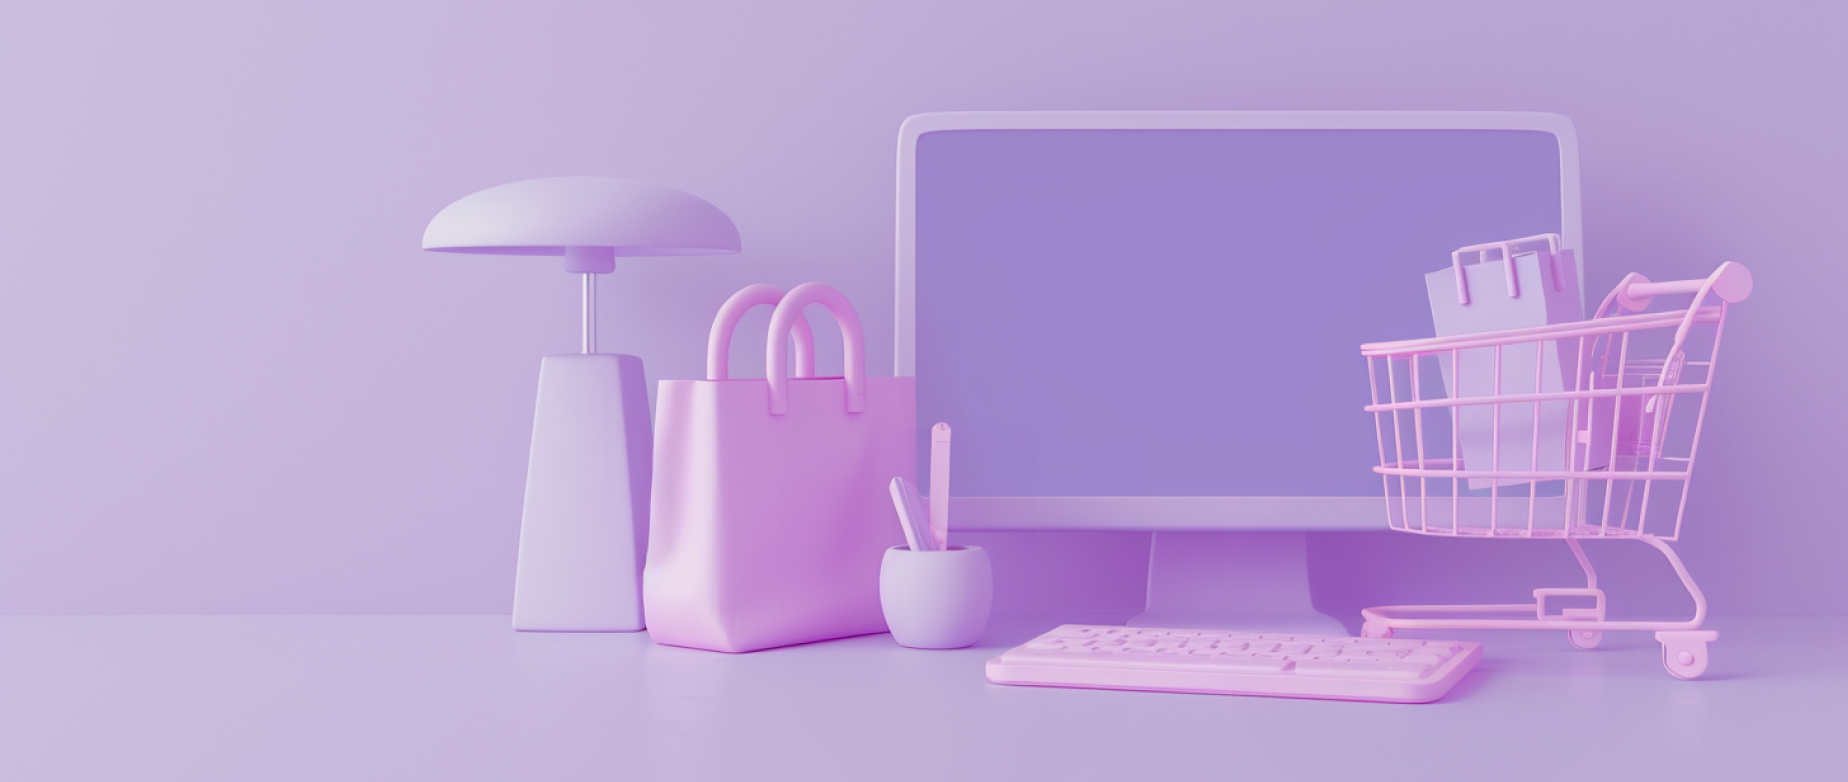 A light purple desk display with a lamp, computer, purse and shopping cart.